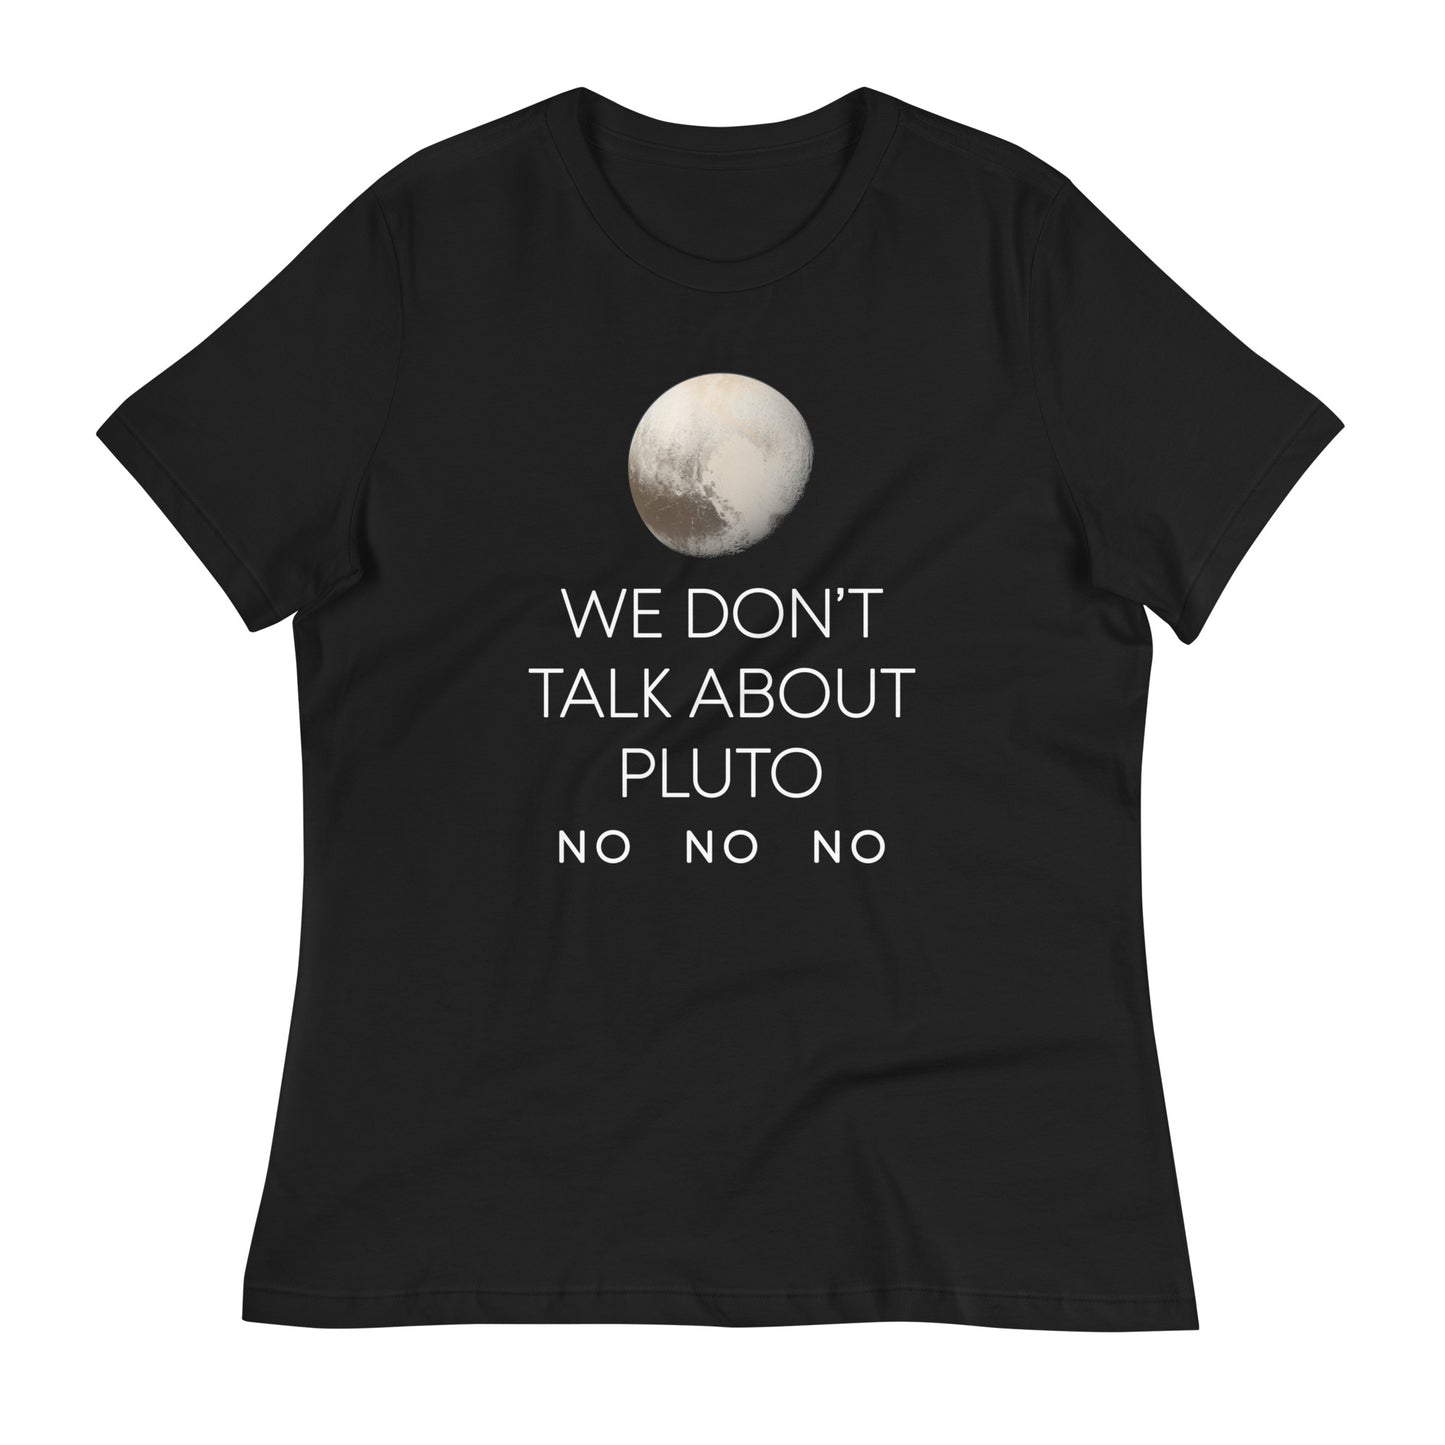 We Don't Talk About Pluto Women's Signature Tee